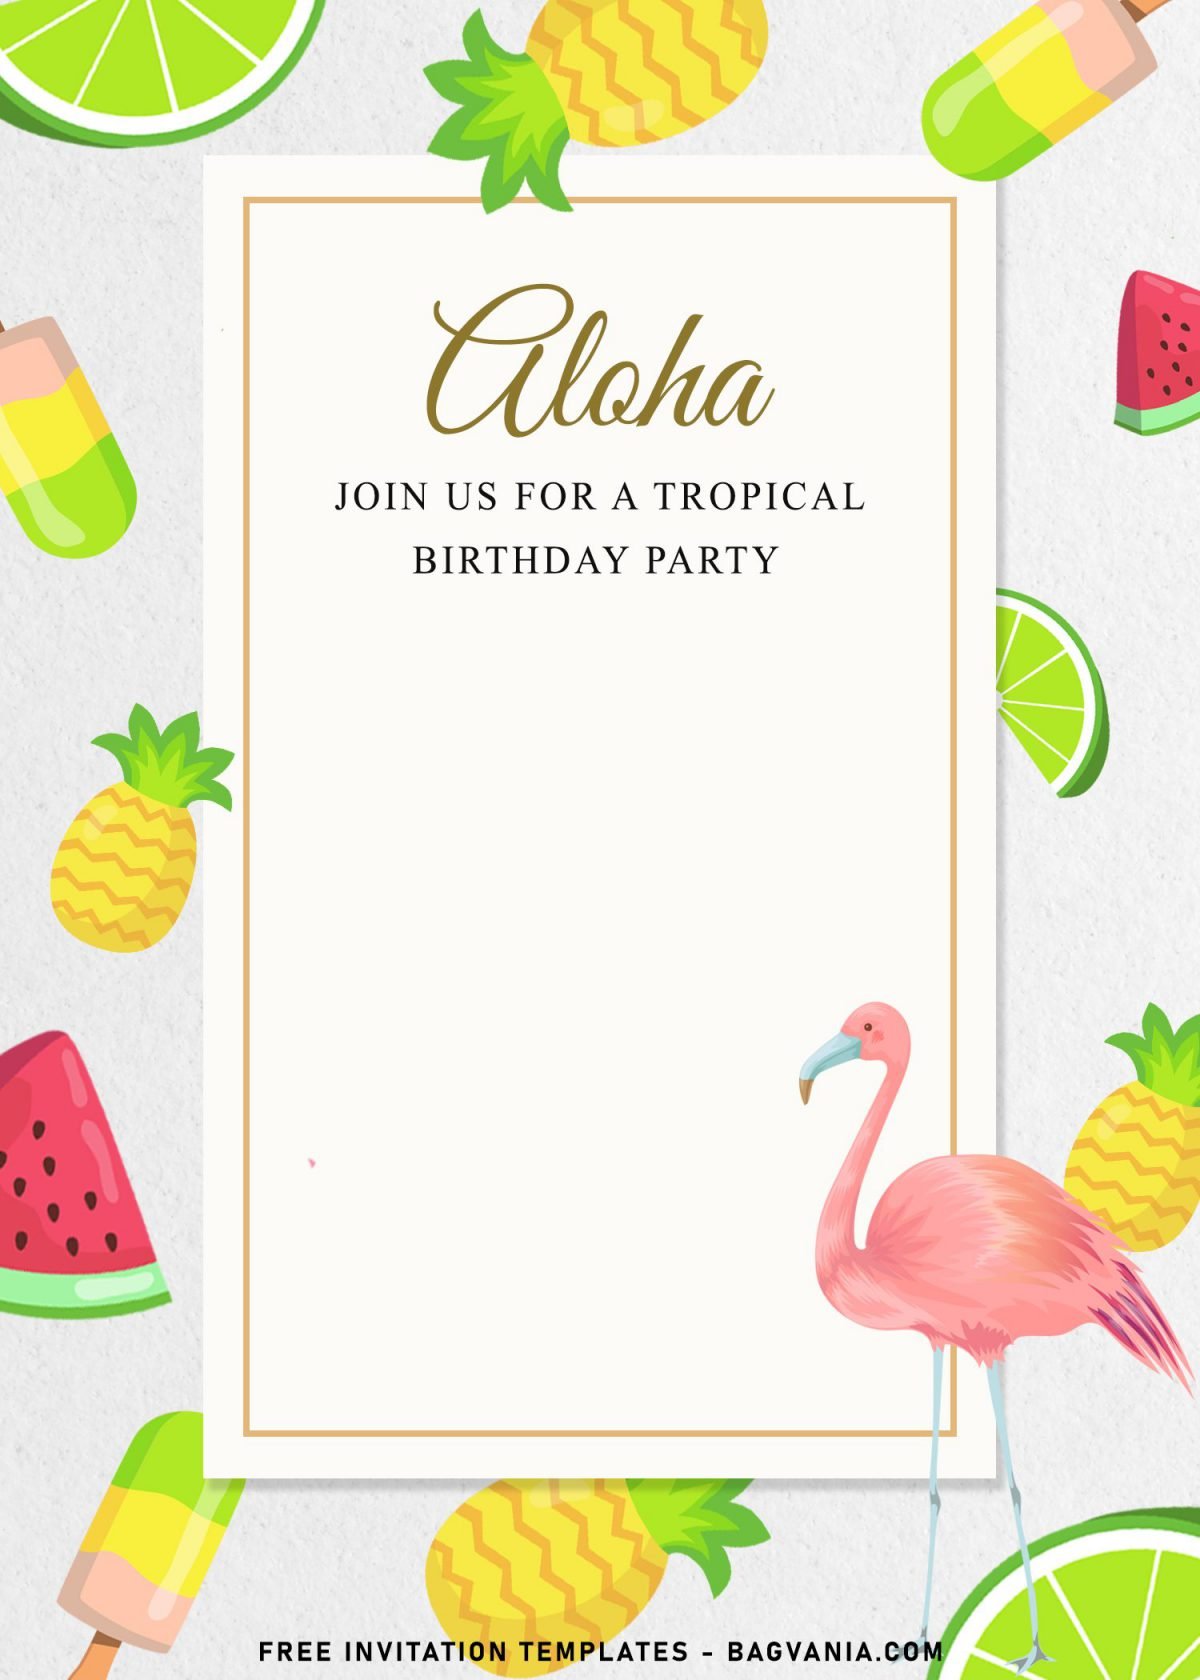 7+ Best Tropical Birthday Invitation Templates To Celebrate Your Kid's Birthday In Summer and has Watermelon